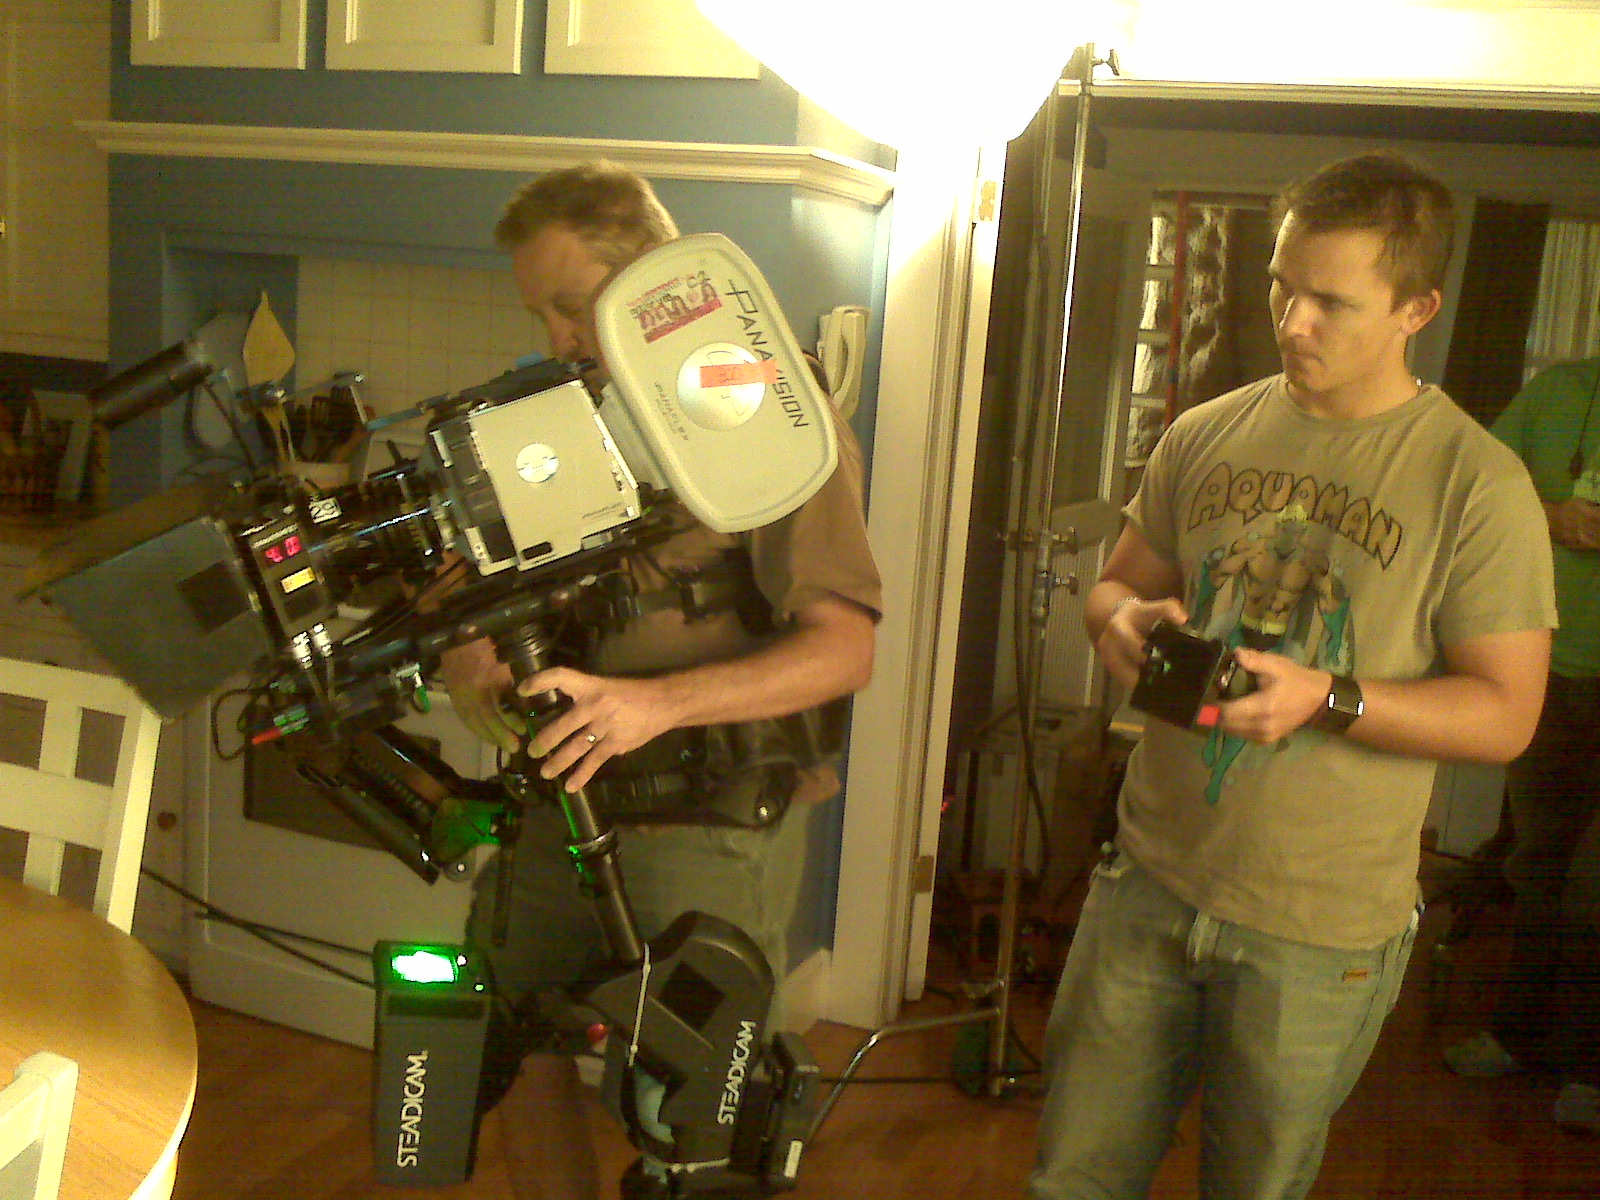 Jason Gibson watching a scene from behind the Steadicam.